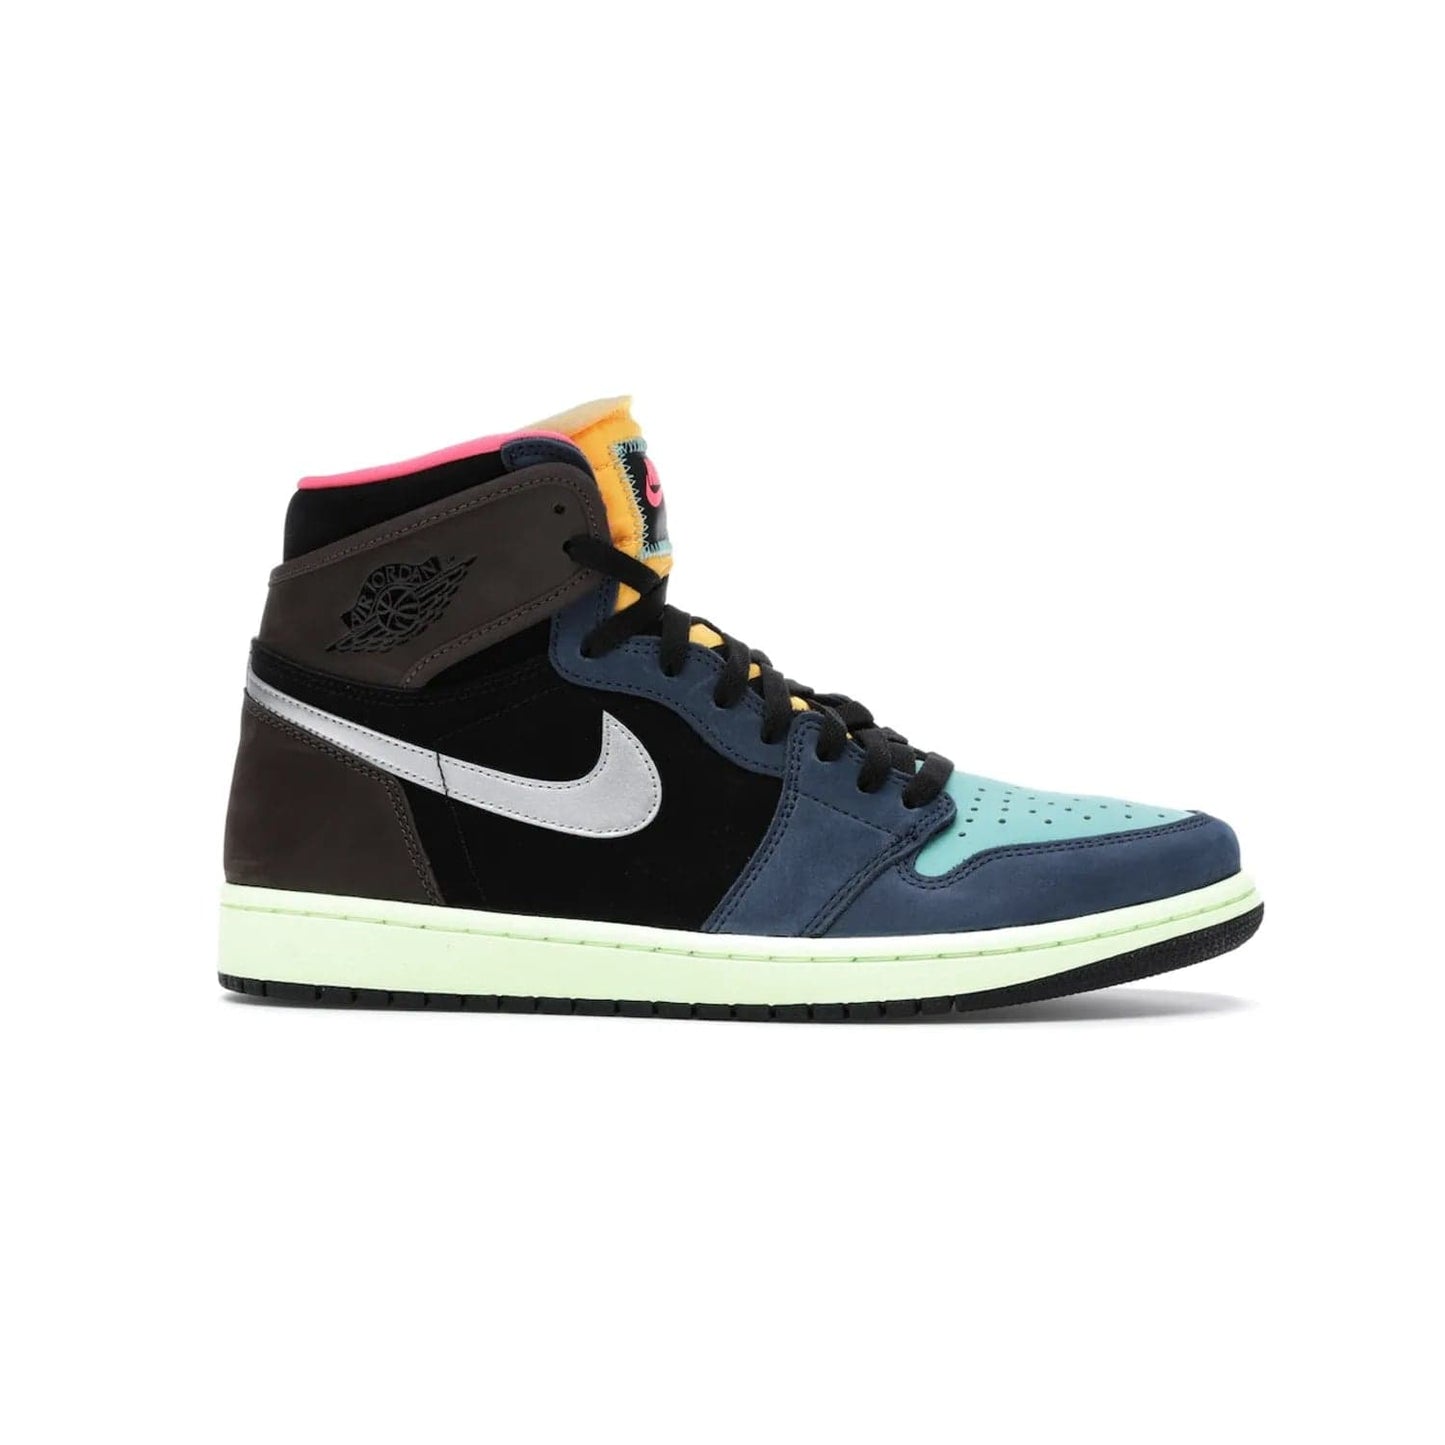 Jordan 1 Retro High Tokyo Bio Hack - Image 2 - Only at www.BallersClubKickz.com - Step up your sneaker game with the Air Jordan 1 Retro High Tokyo Bio Hack! Unique design featuring multiple materials and eye-catching colors. Metallic leather Swoosh and light green midsole for a stunning look. Available now for just $170.